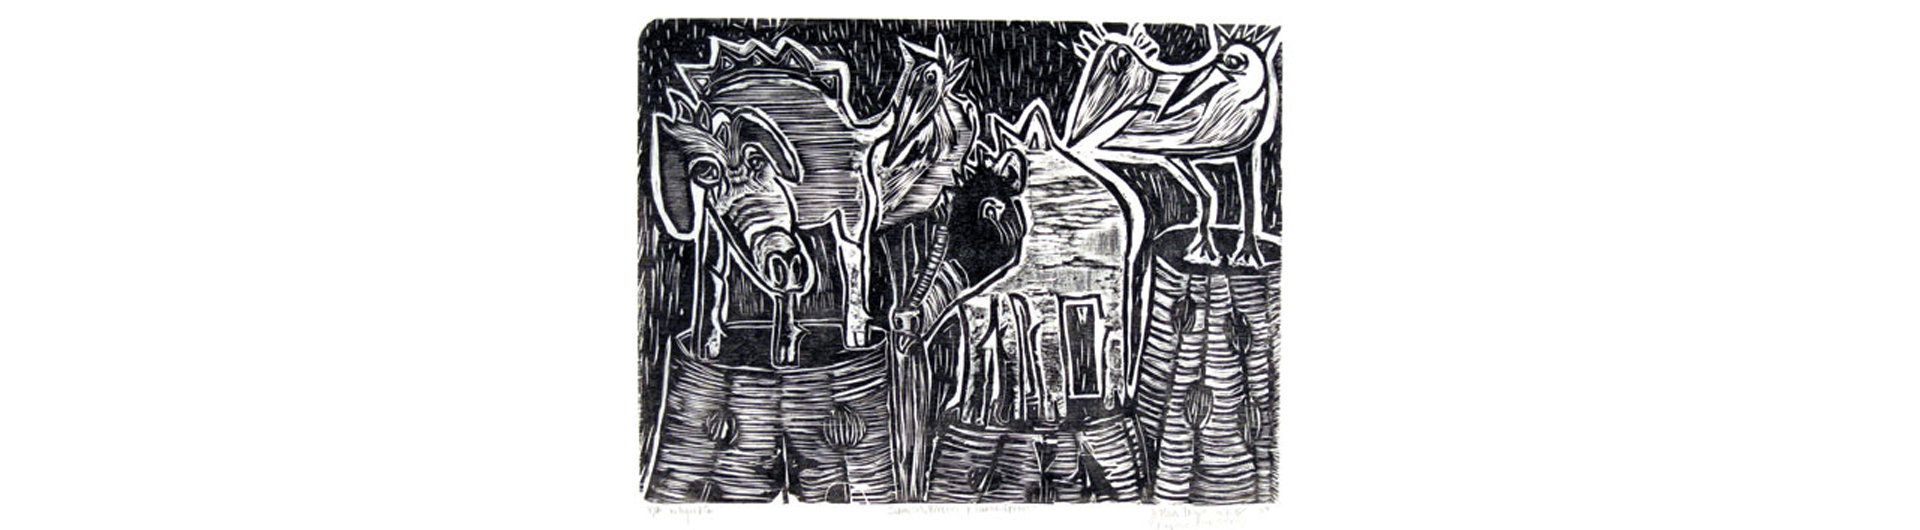 Woodcut print of fantastic animal characters by Jessica Freyre-Cuebas